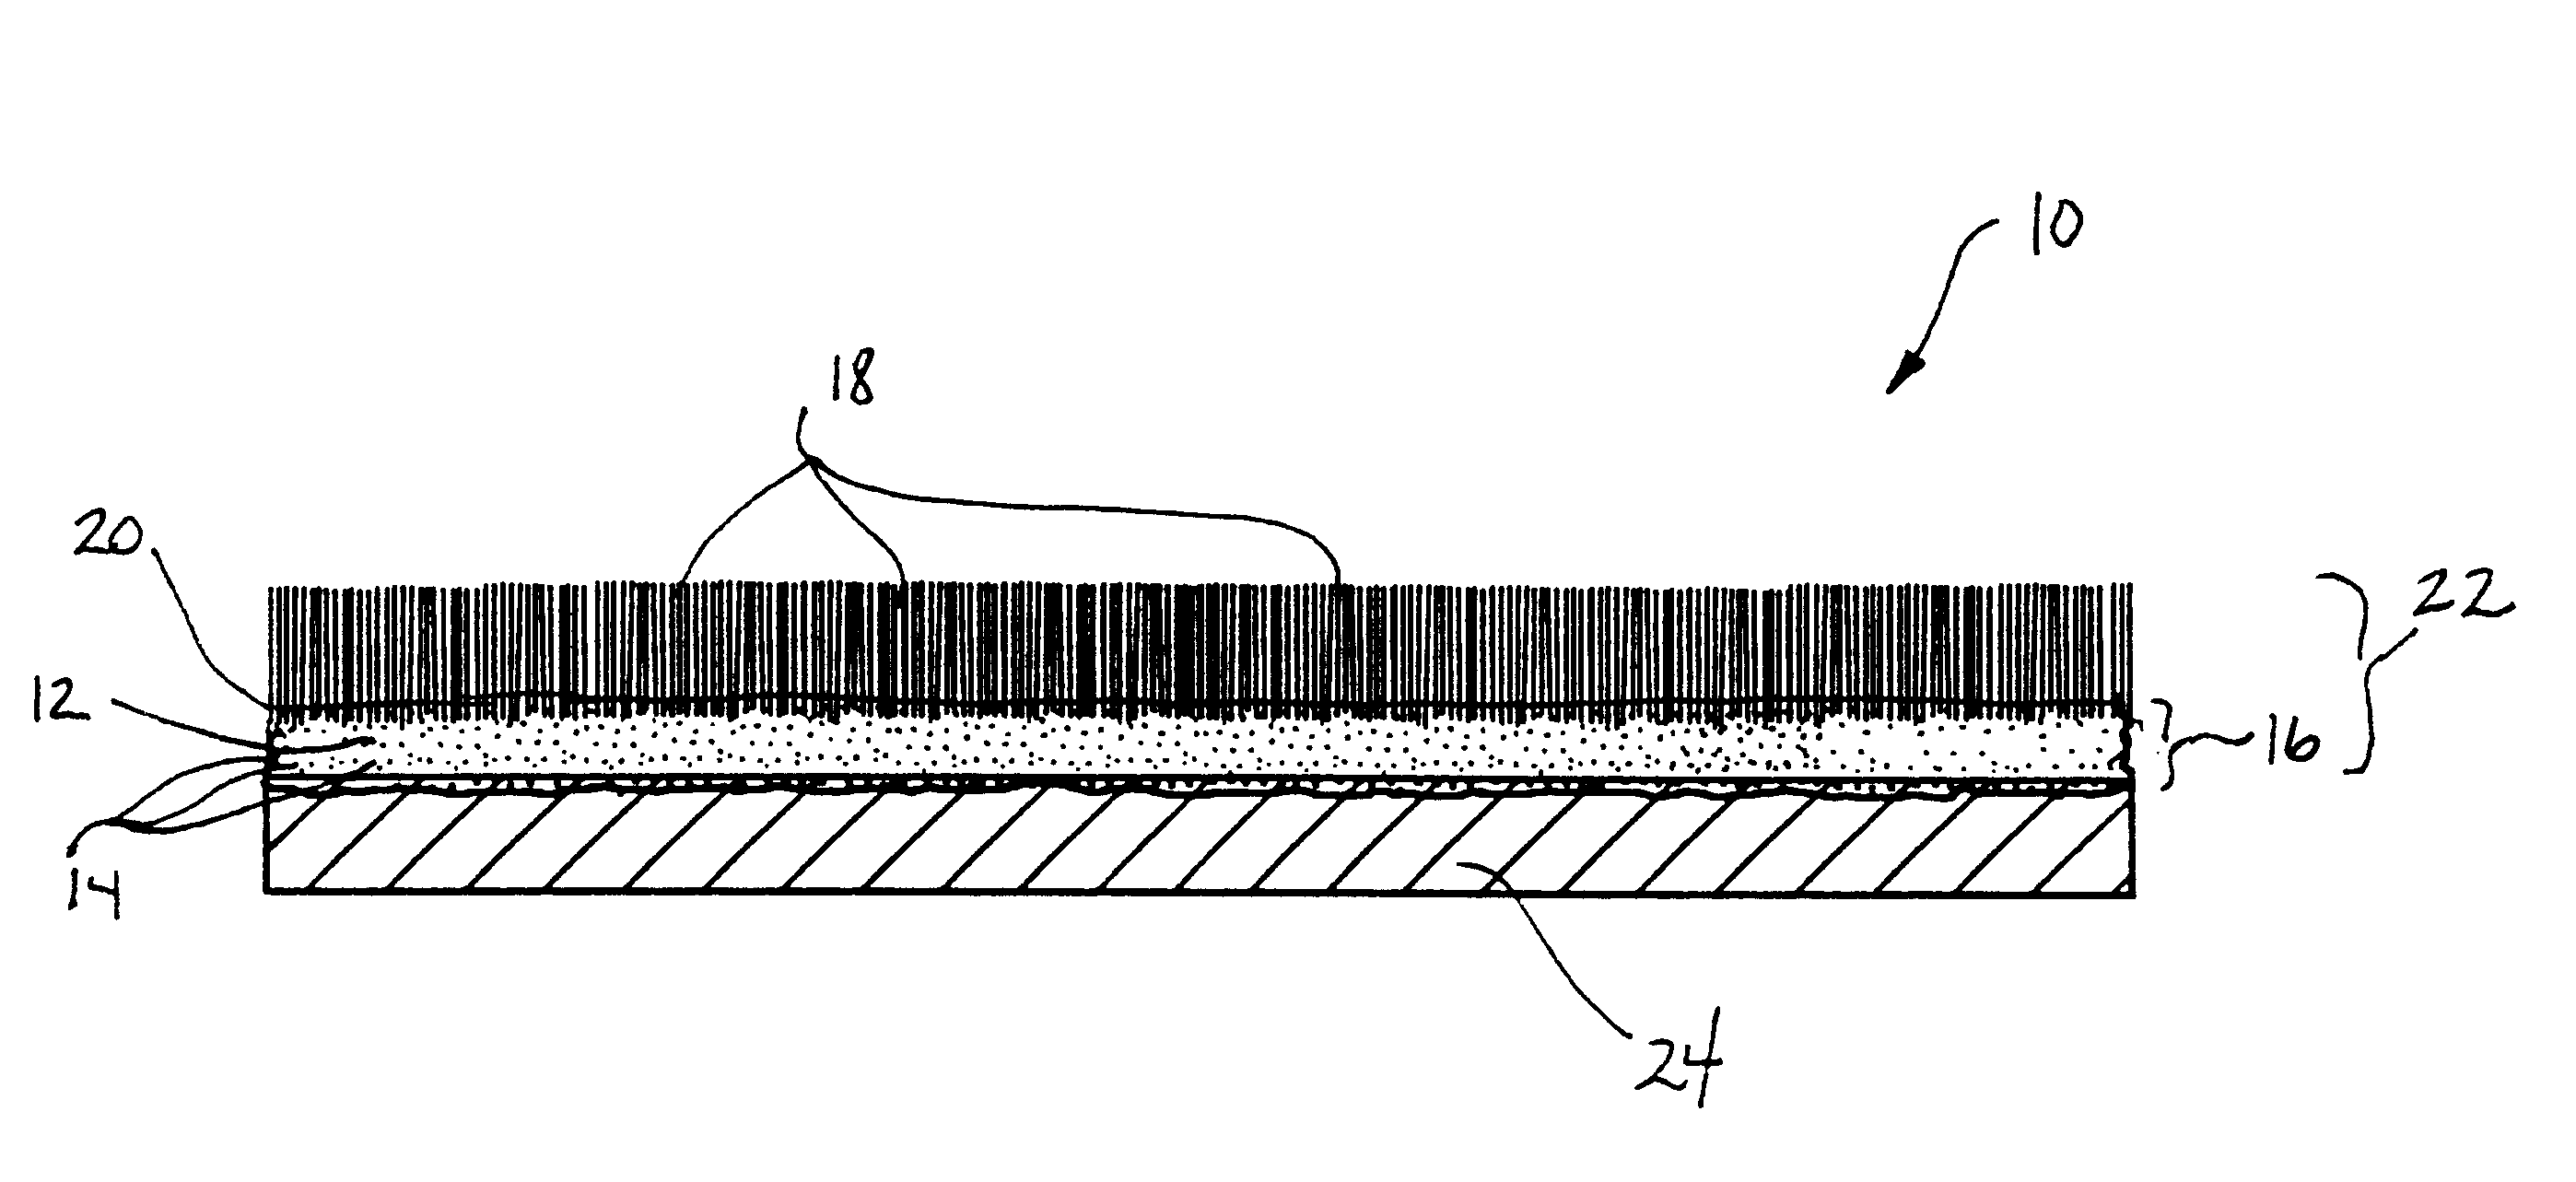 Fabric coating containing energy absorbing phase change material and method of manufacturing same